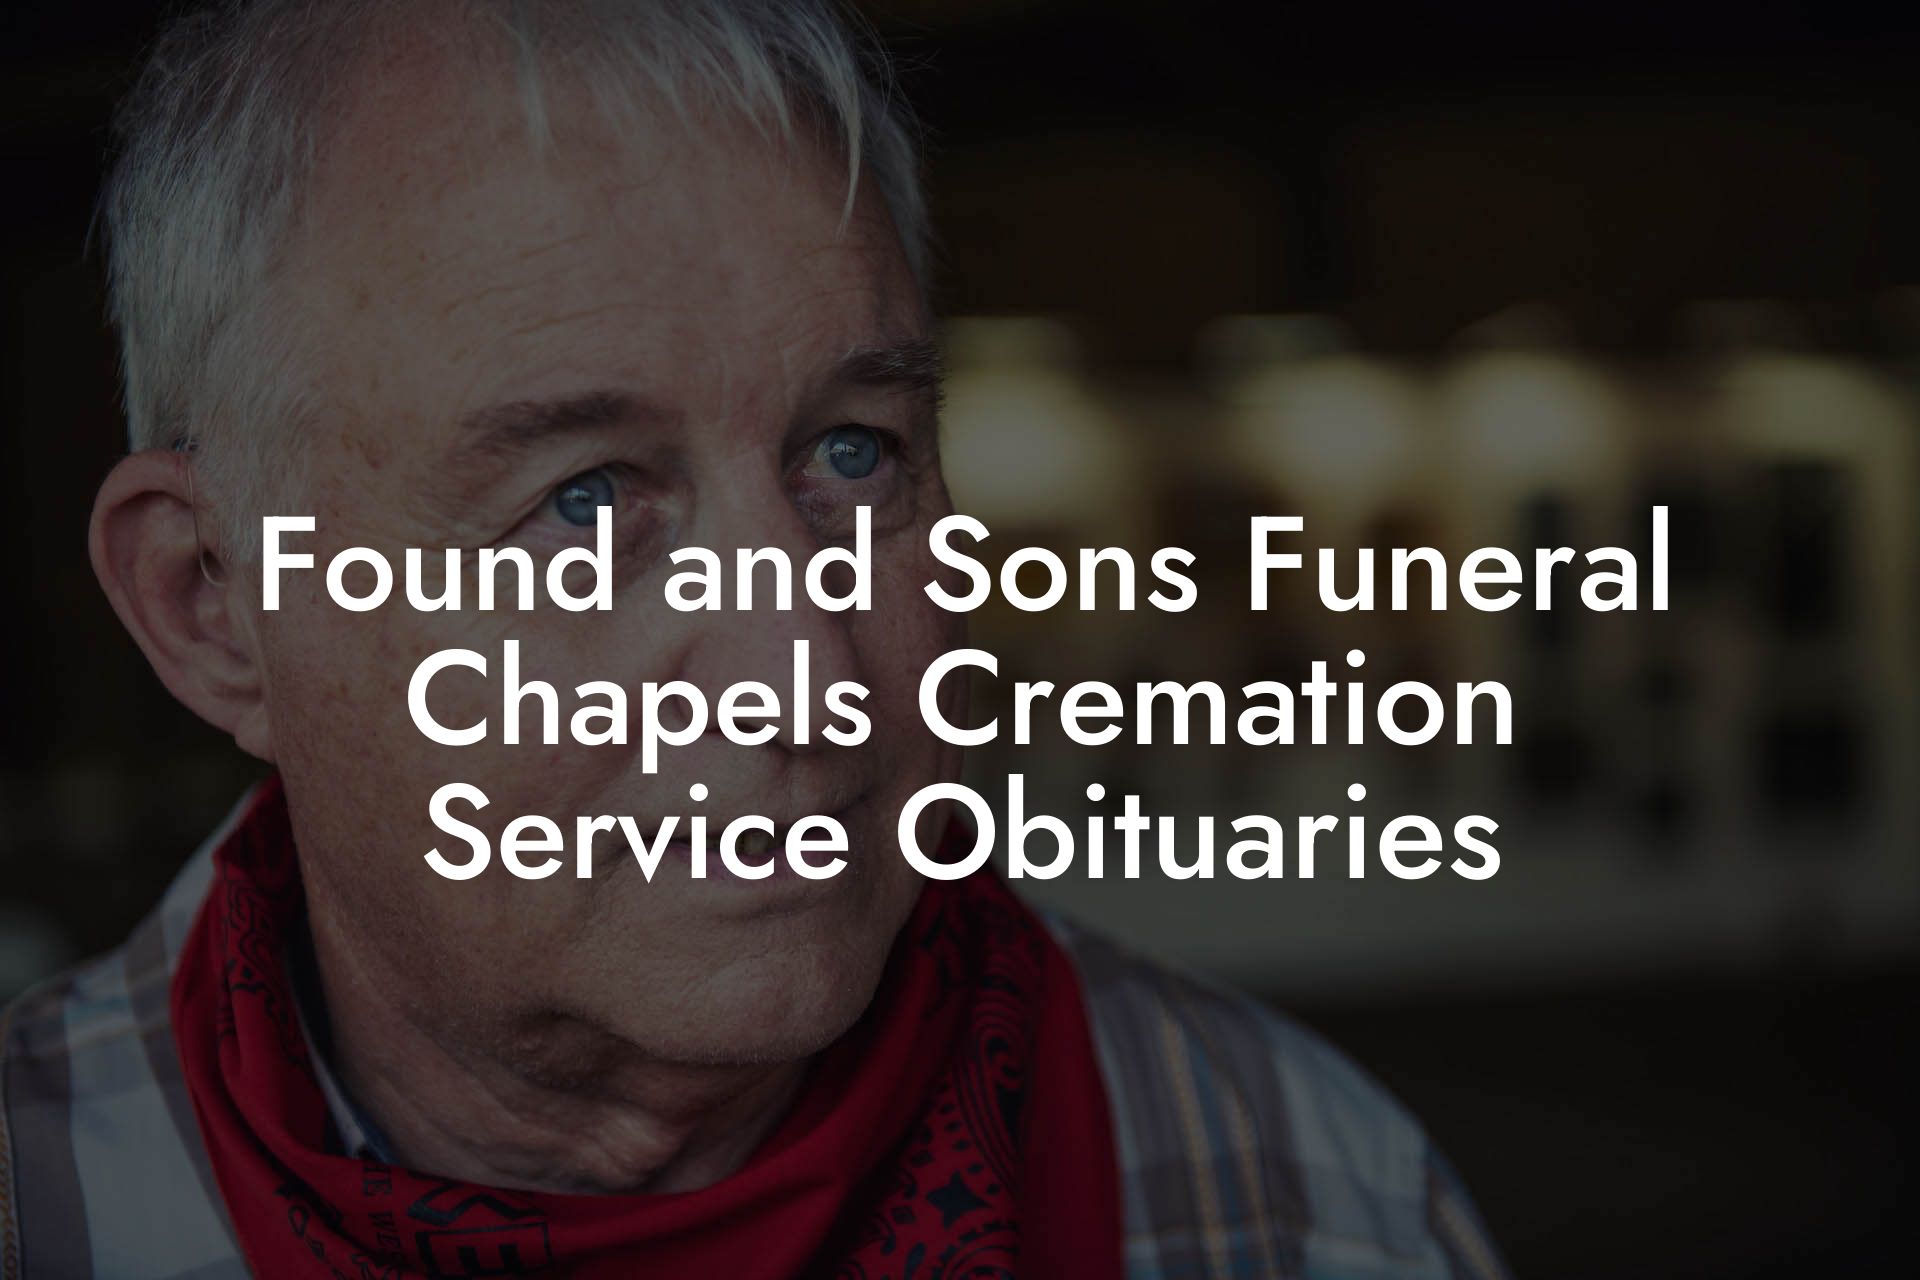 Found and Sons Funeral Chapels Cremation Service Obituaries - Eulogy ...